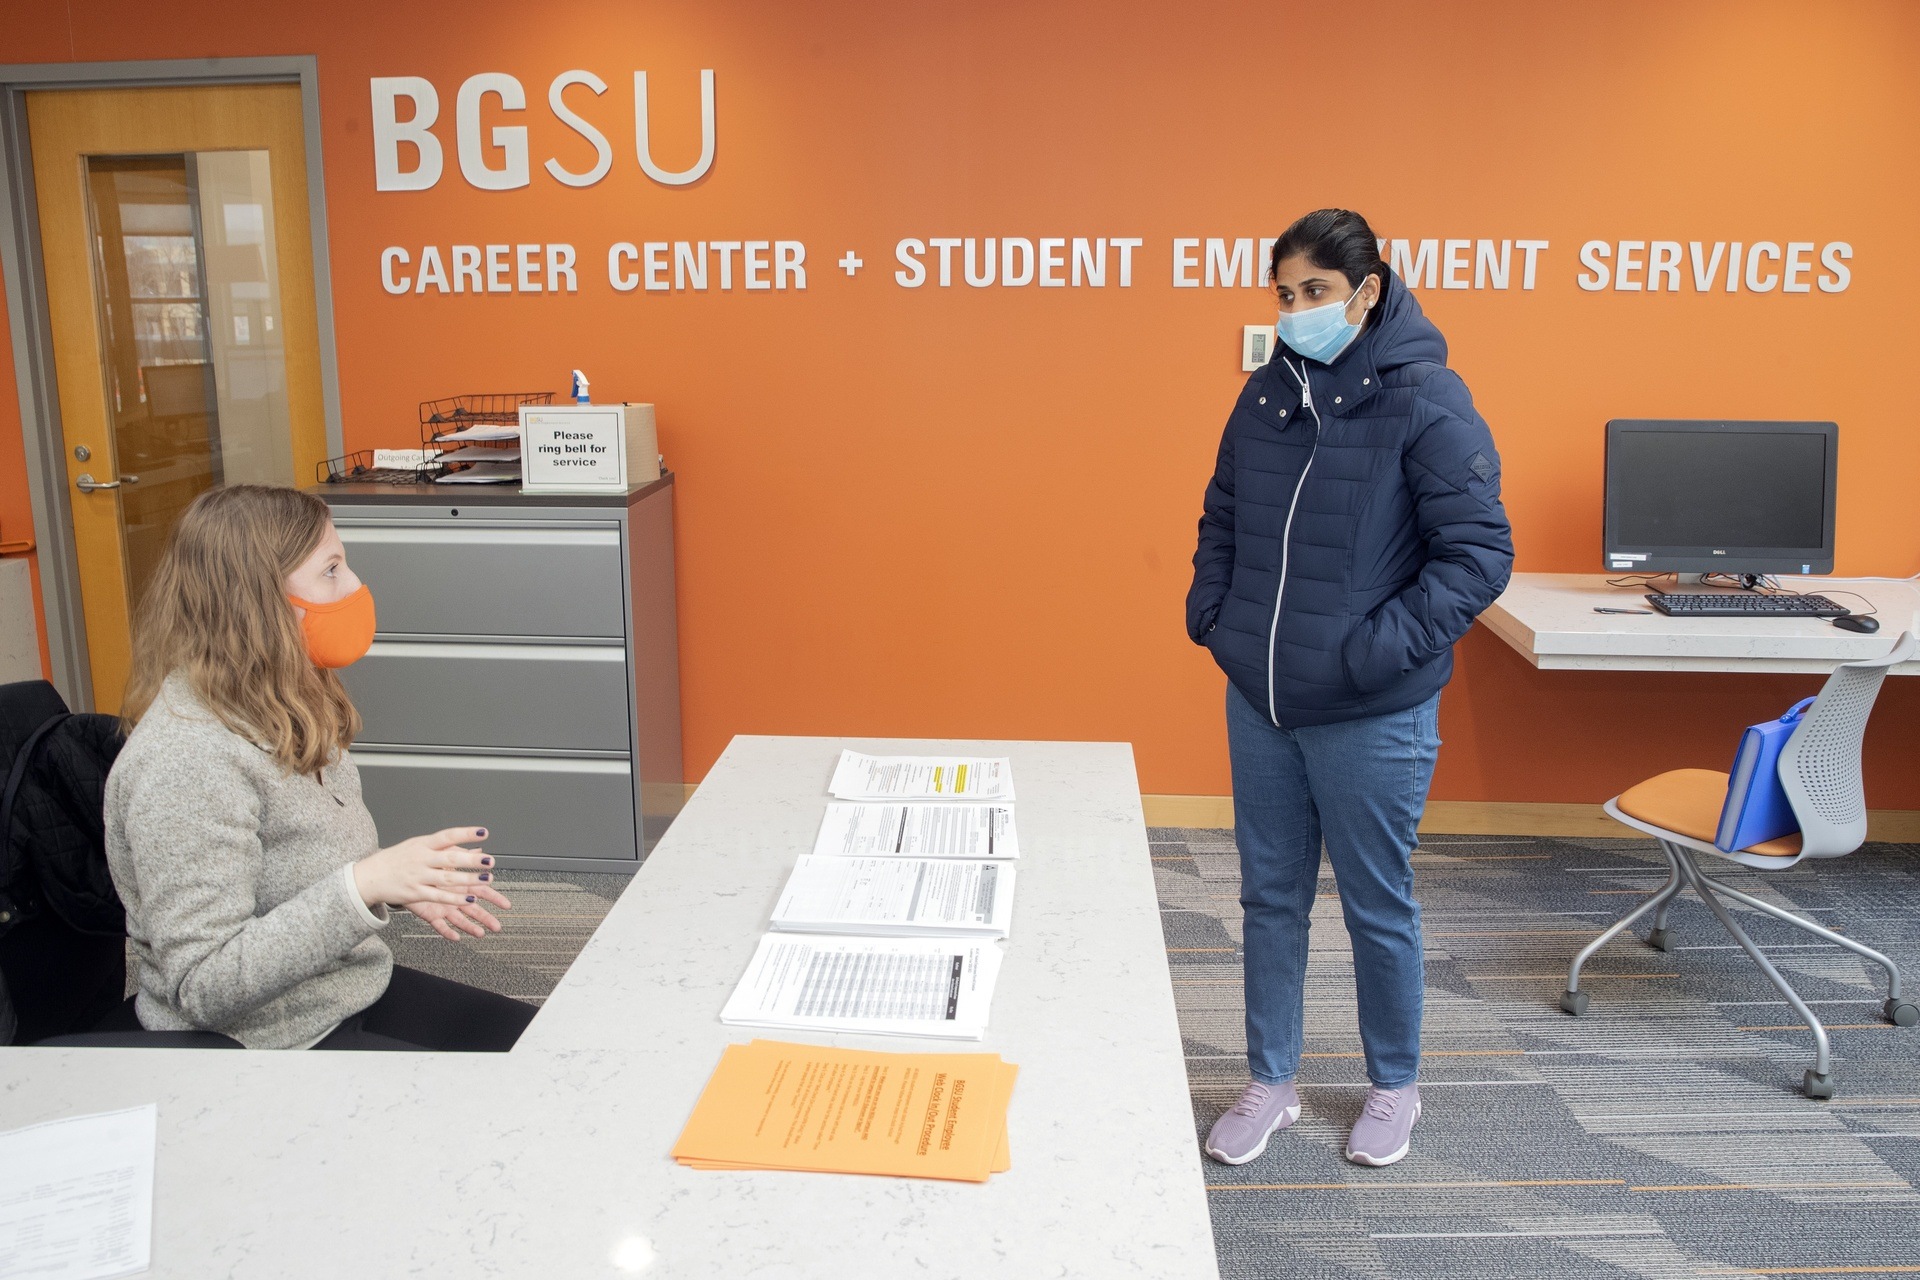 A female student wearing a facemask chats with a masked female employee of the BGSU Career Center at the front desk